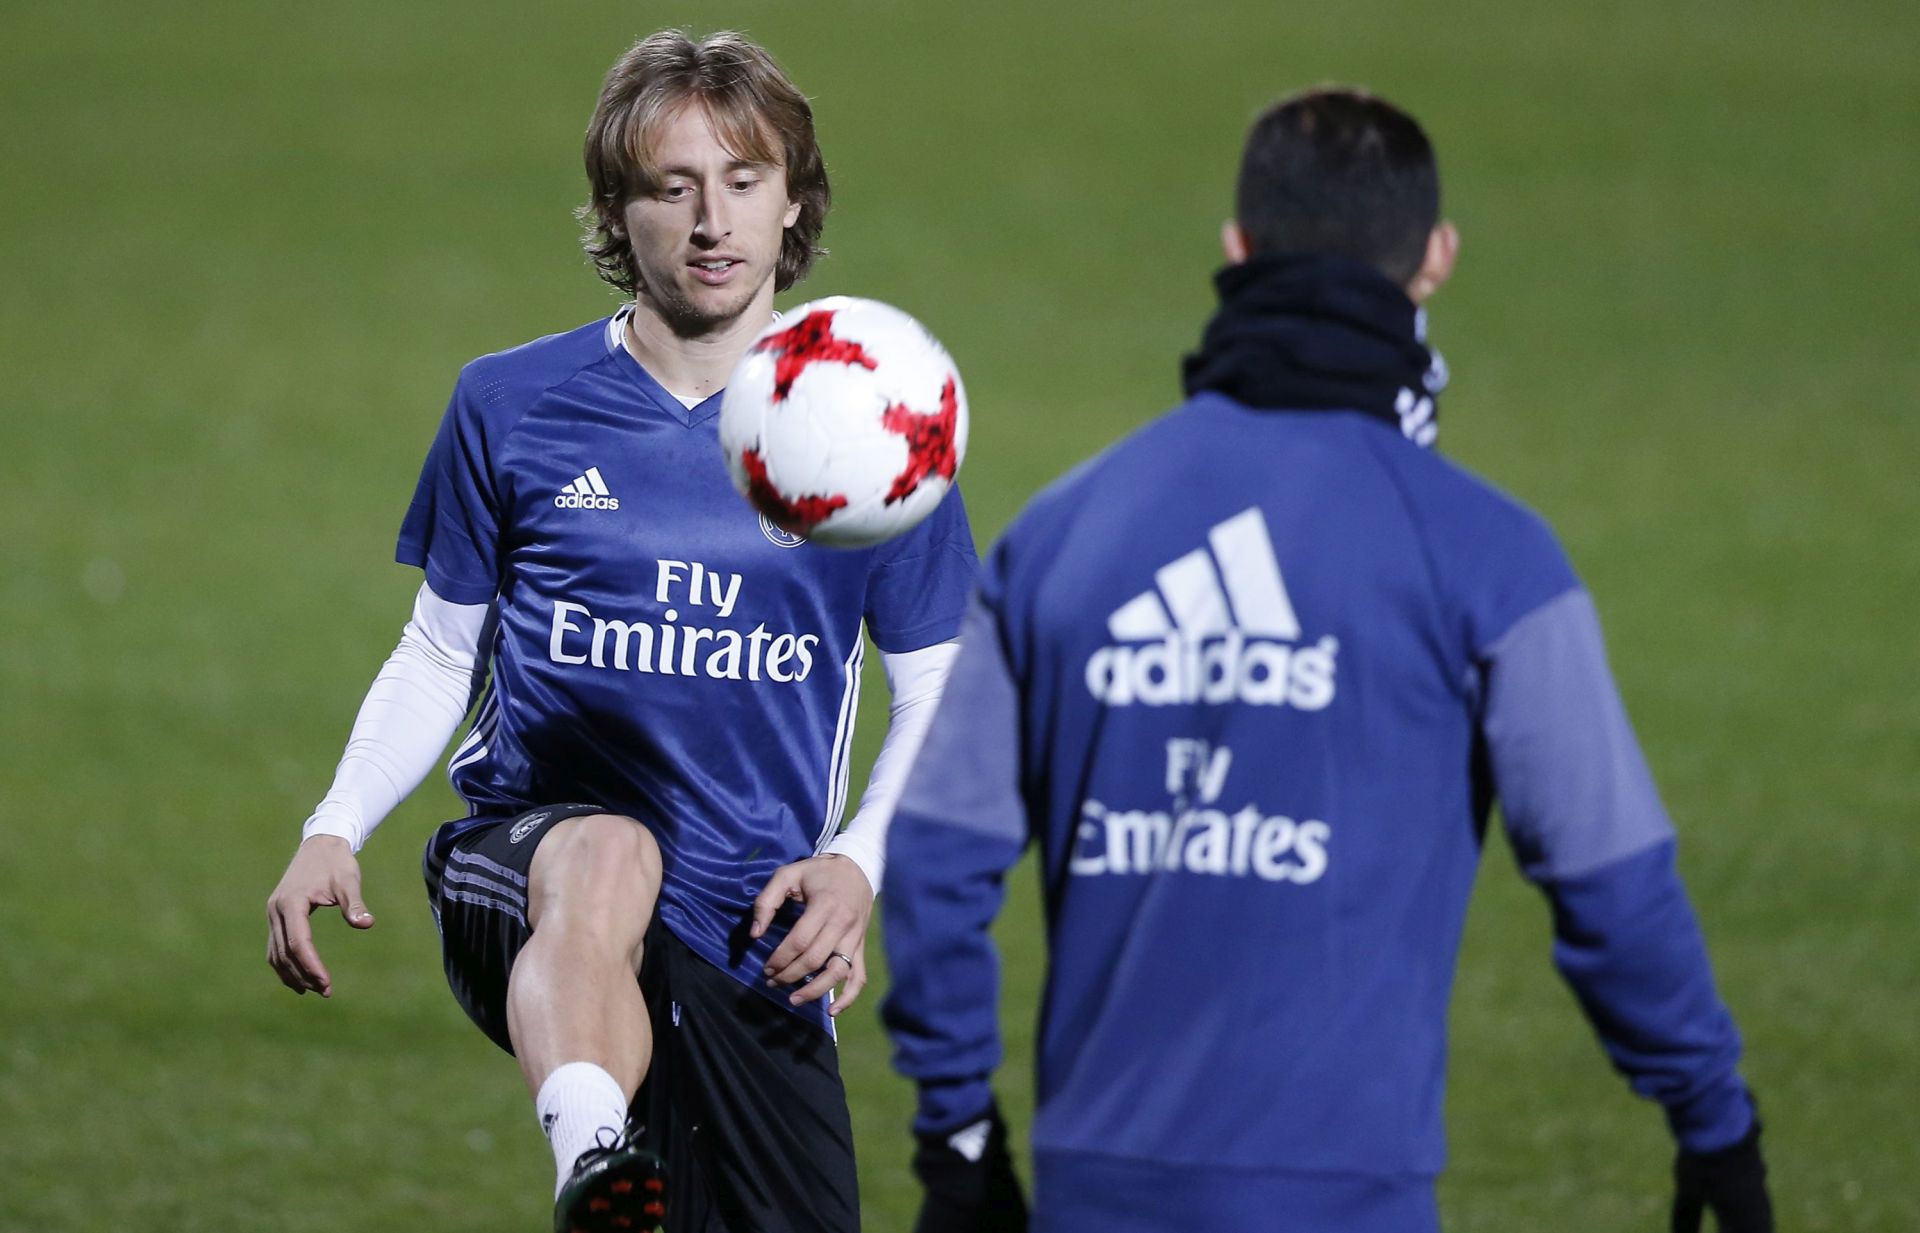 epa05673600 Real Madrid’s midfielder Luka Modric (L) controls the ball during the team's training session for the FIFA Club World Cup 2016 in Yokohama, south of Tokyo, Japan, 13 December 2016. Real Madrid will face Mexican club Club America​ in a semifinal match on 15 December.  EPA/YUYA SHINO